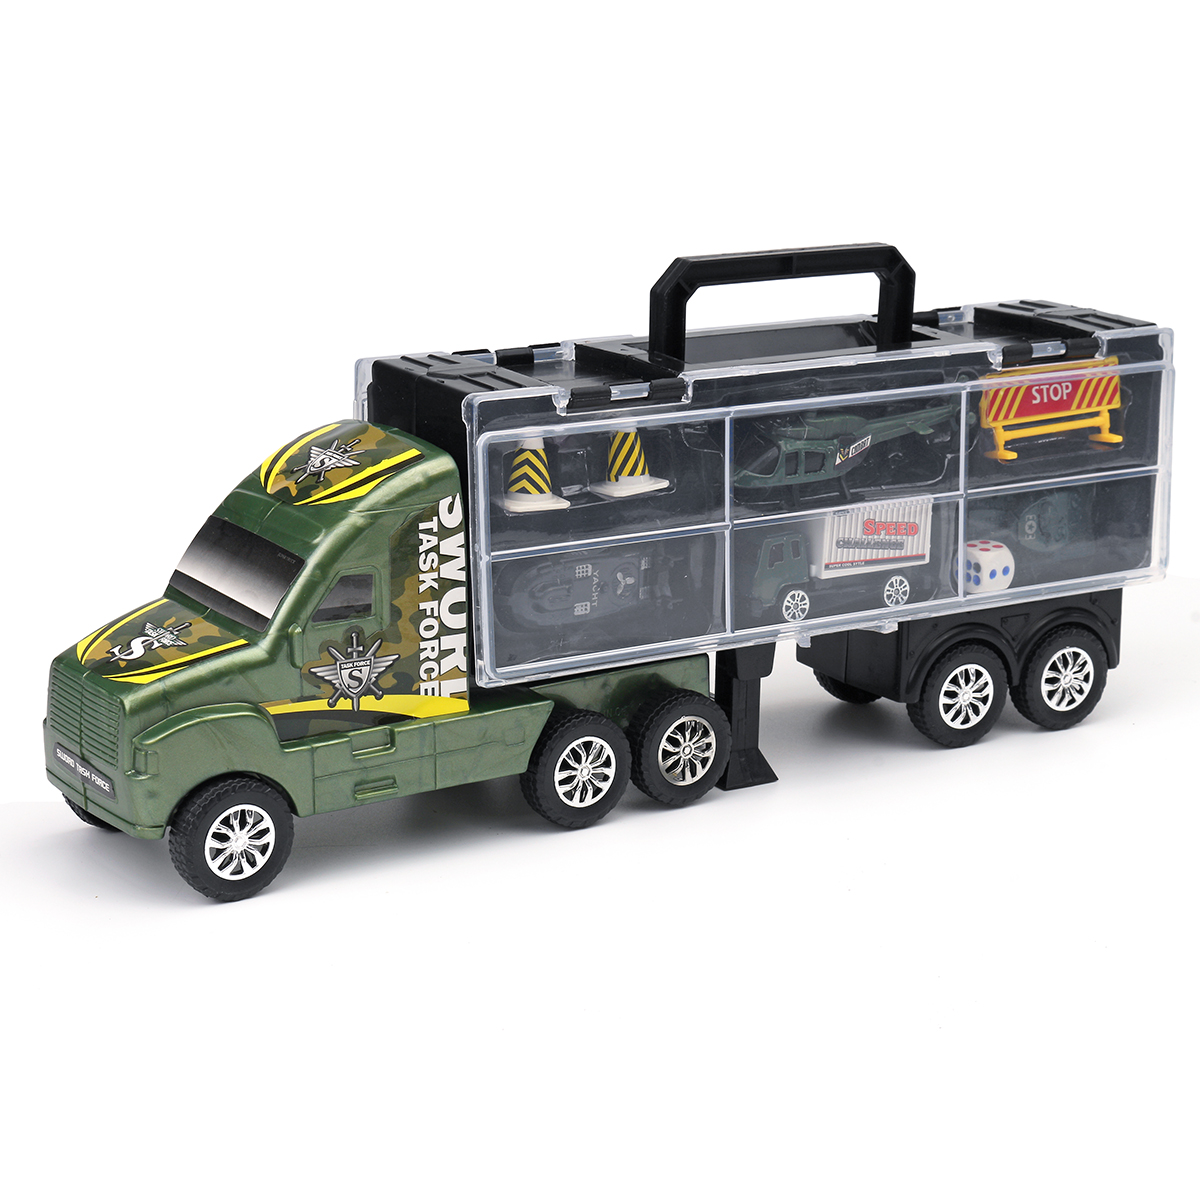 Alloy-Trailer-Container-Car-Storage-Box-Diecast-Car-Model-Set-Toy-for-Childrens-Gift-1635959-7